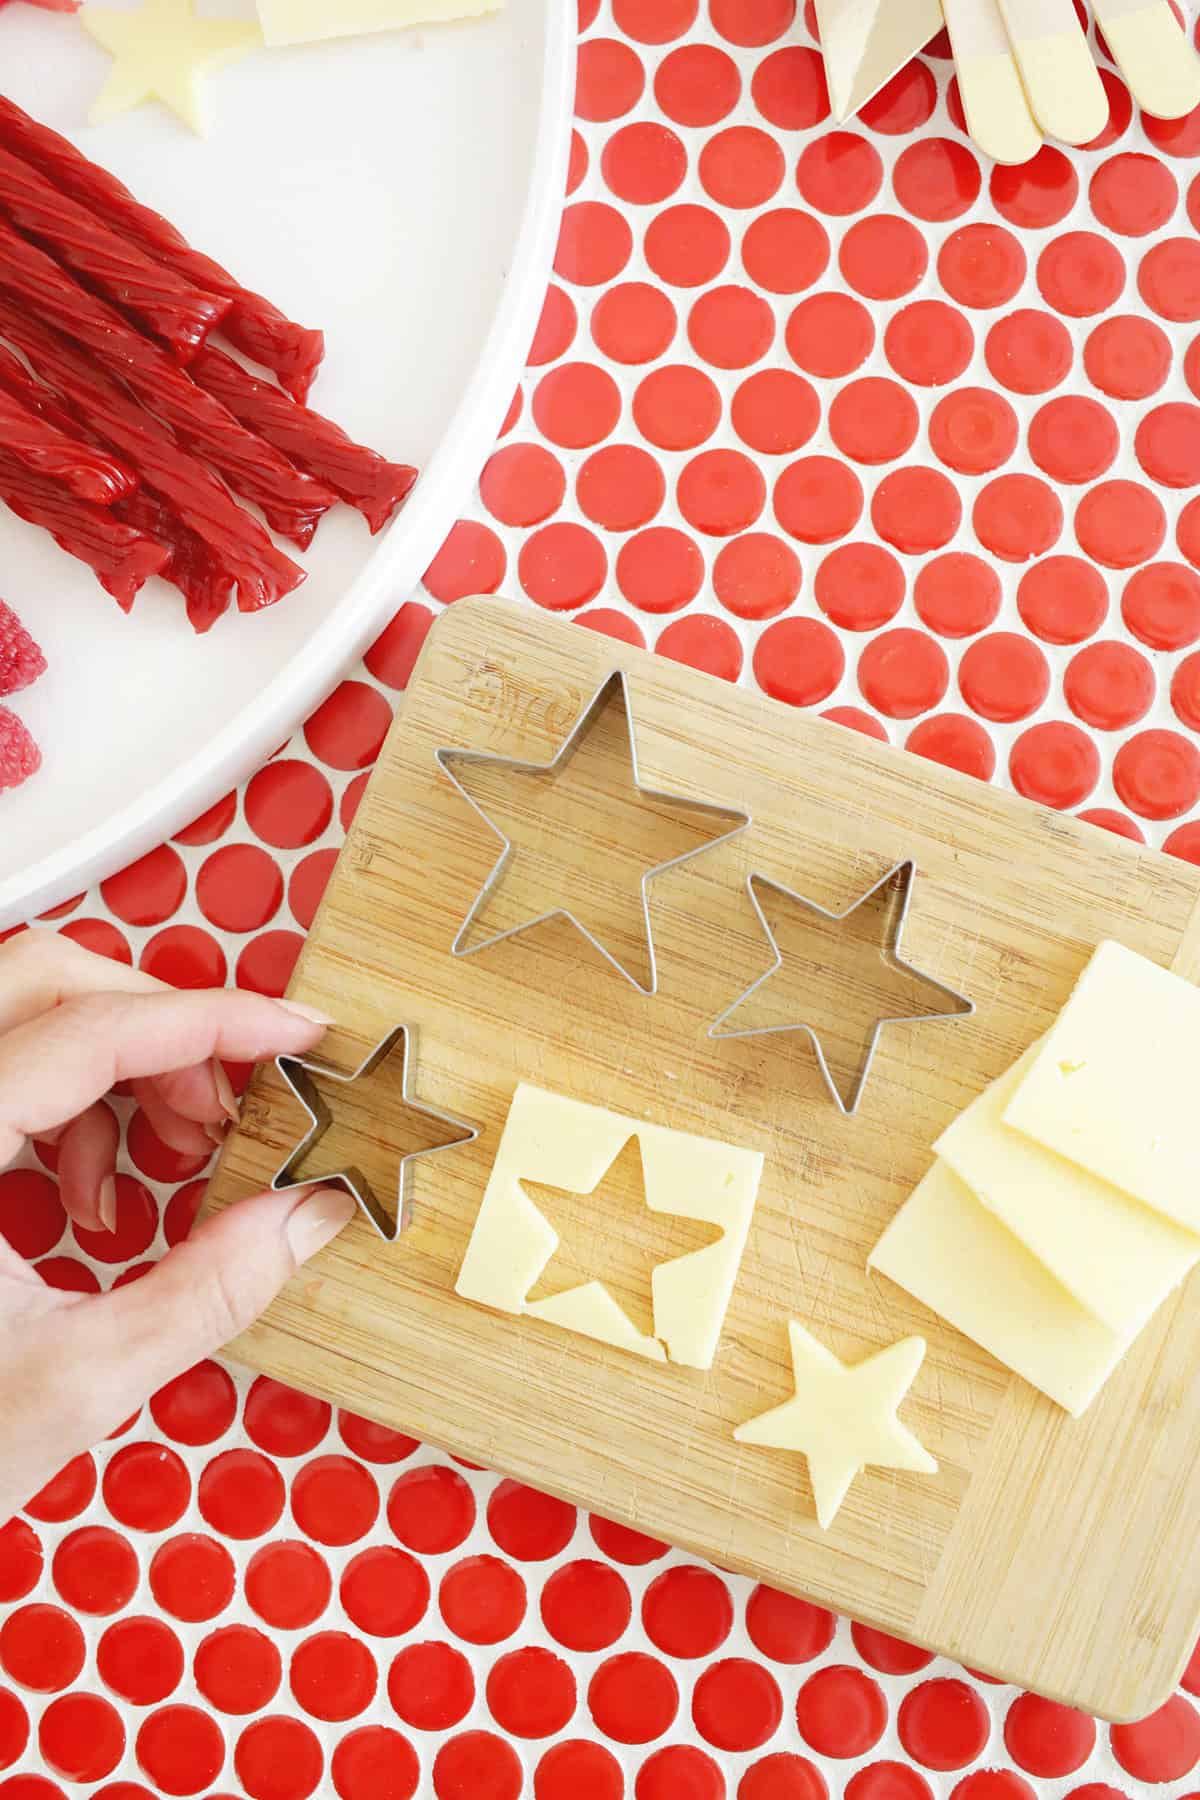 cutting cheese into star shapes with a cookie cutter